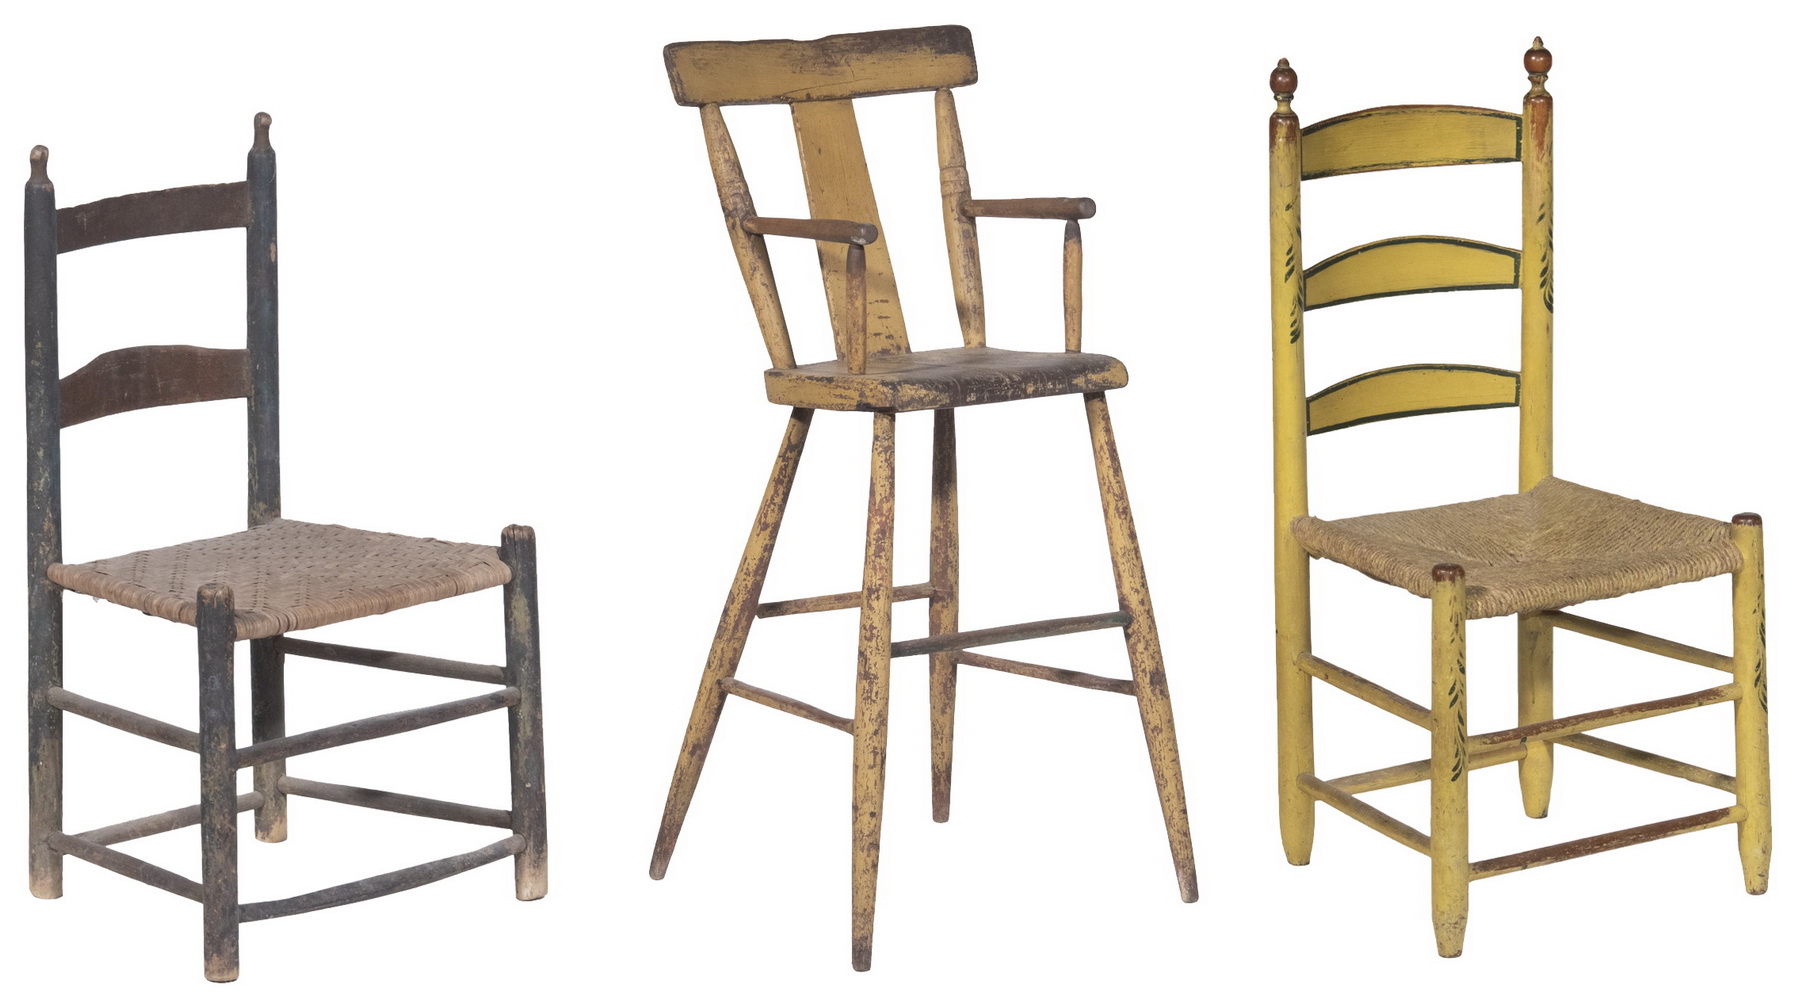  3 COUNTRY PAINTED CHAIRS 1  2b16c0